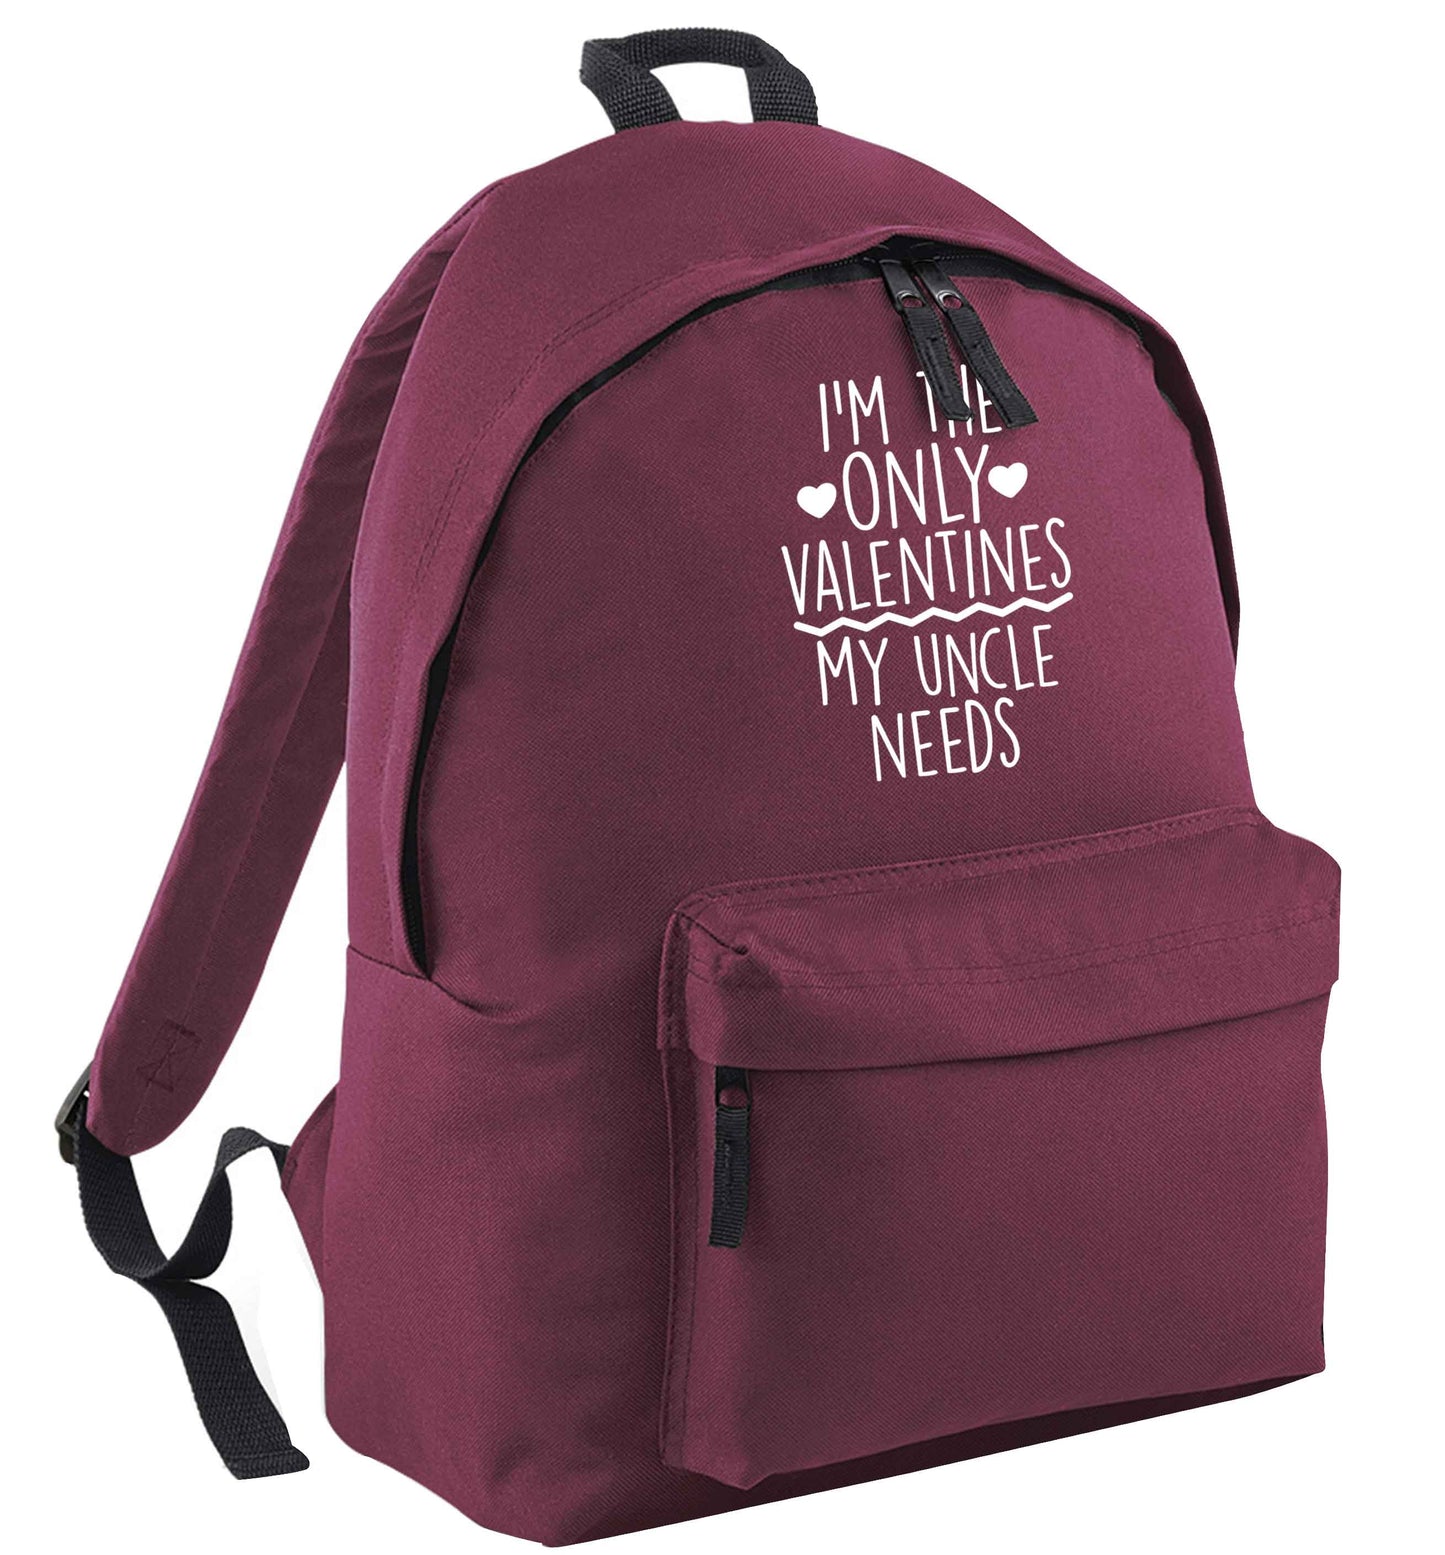 I'm the only valentines my uncle needs black adults backpack